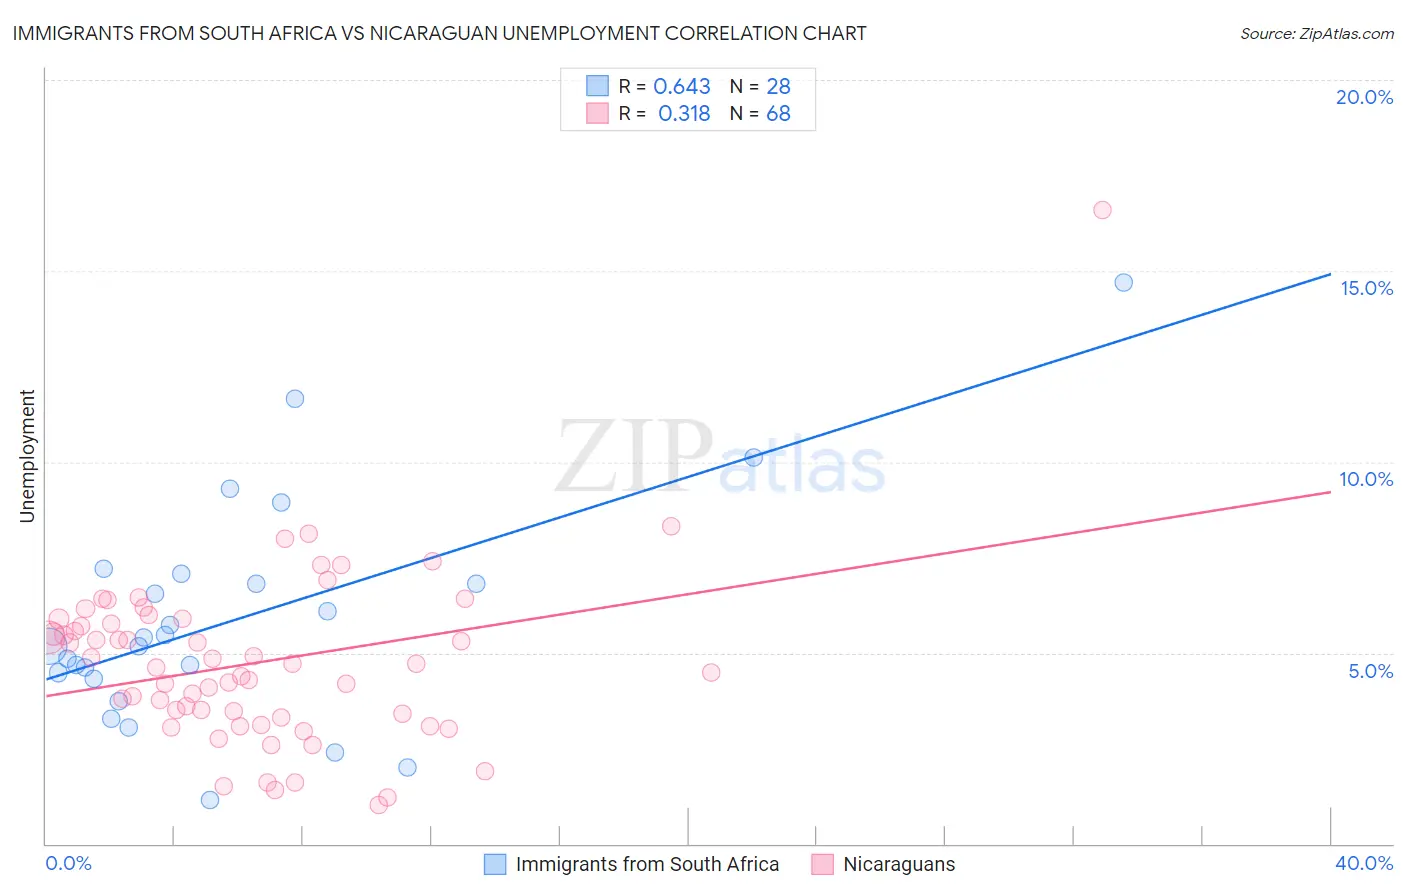 Immigrants from South Africa vs Nicaraguan Unemployment